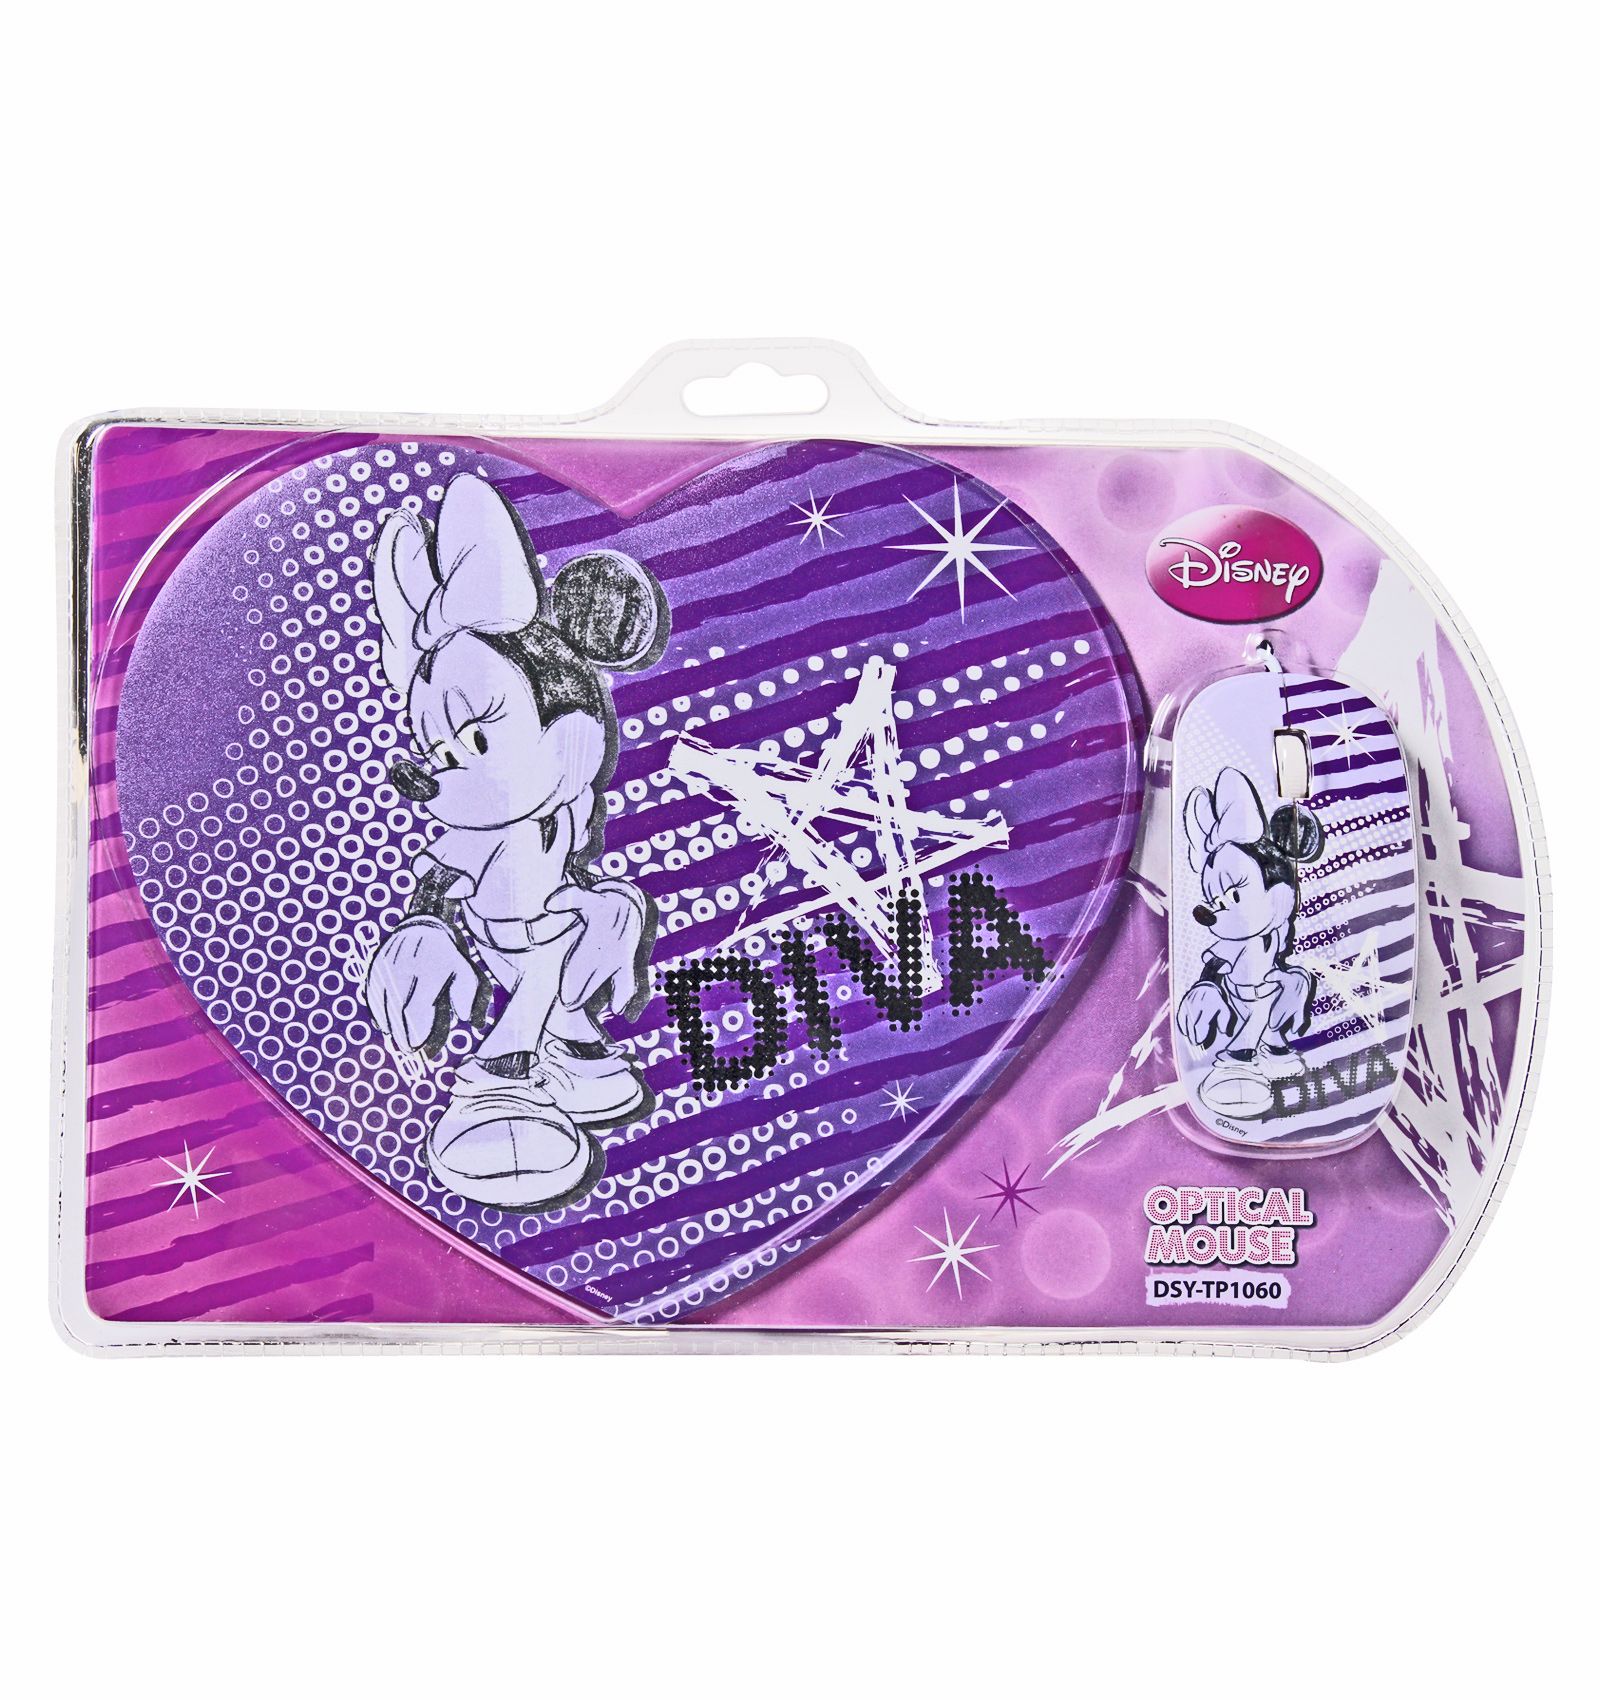 Minnie - Optical Mouse & Mouse Pad